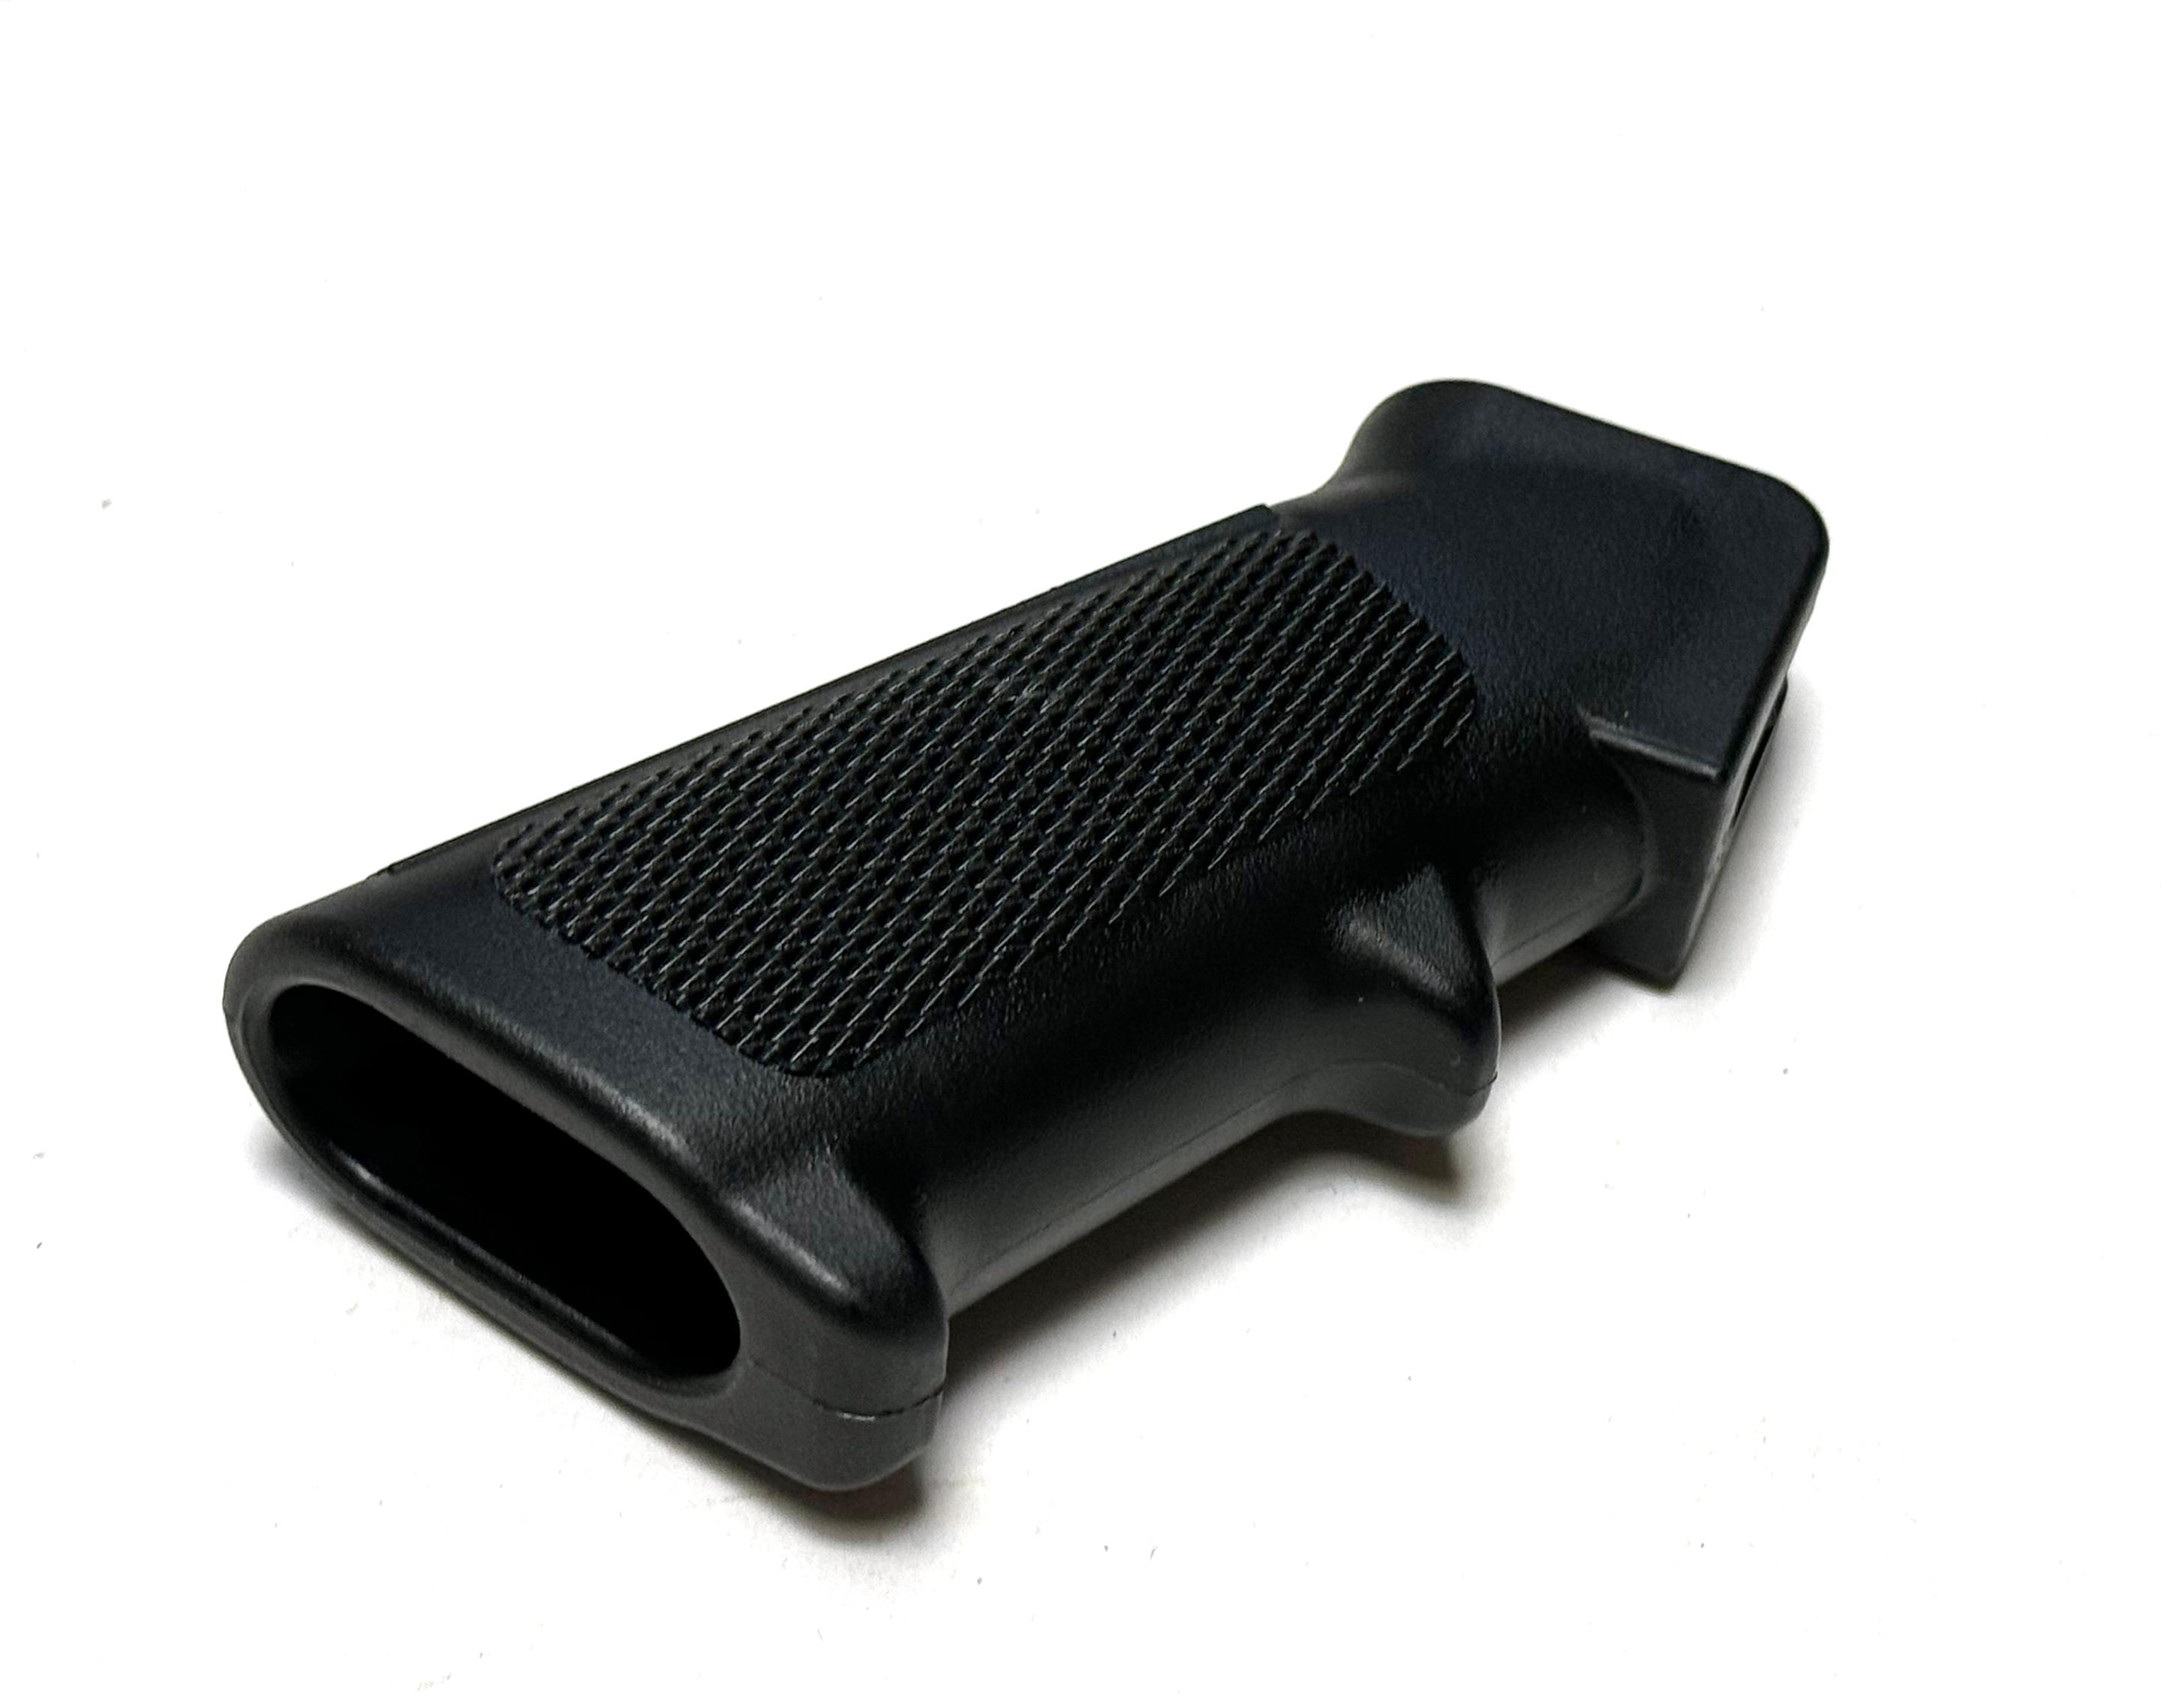 M4 Carbine Heat Shield/Handguard, Rail Covers, Stock, Grip, and Retractable Bipod/Foregrip 